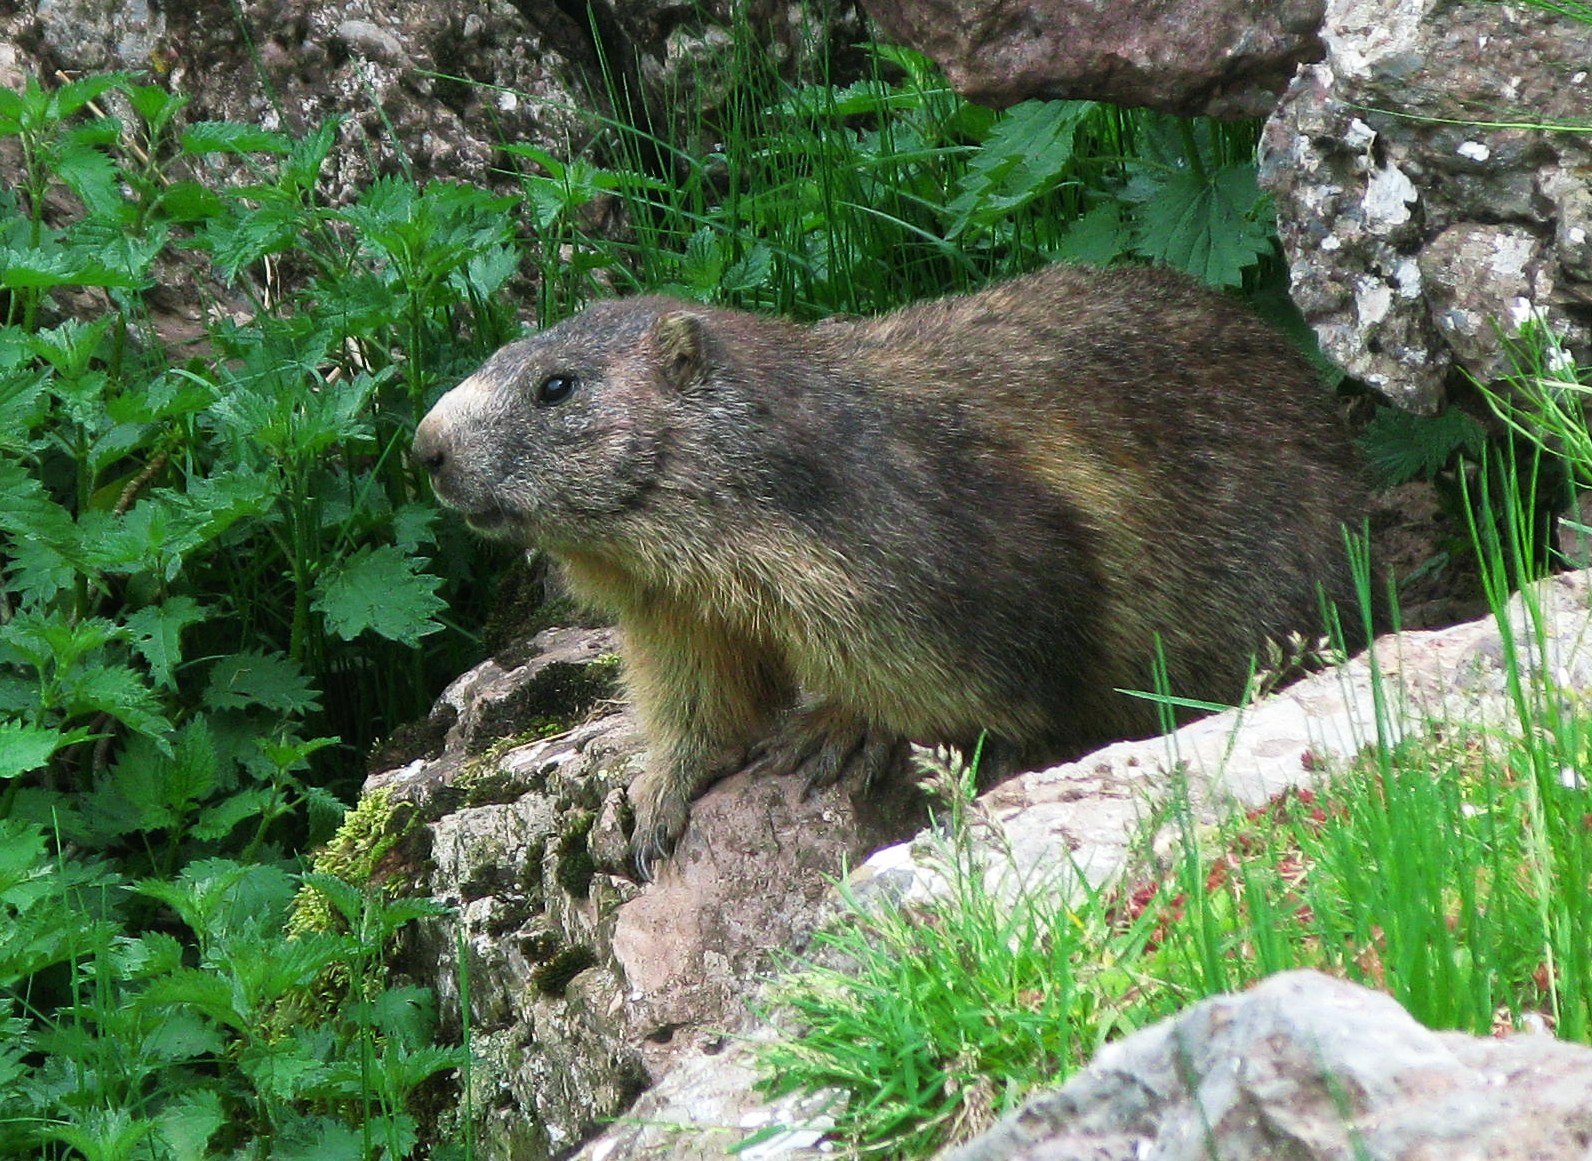 Pyrenees Life, Mountains and Nature: Marmots in the Pyrenees